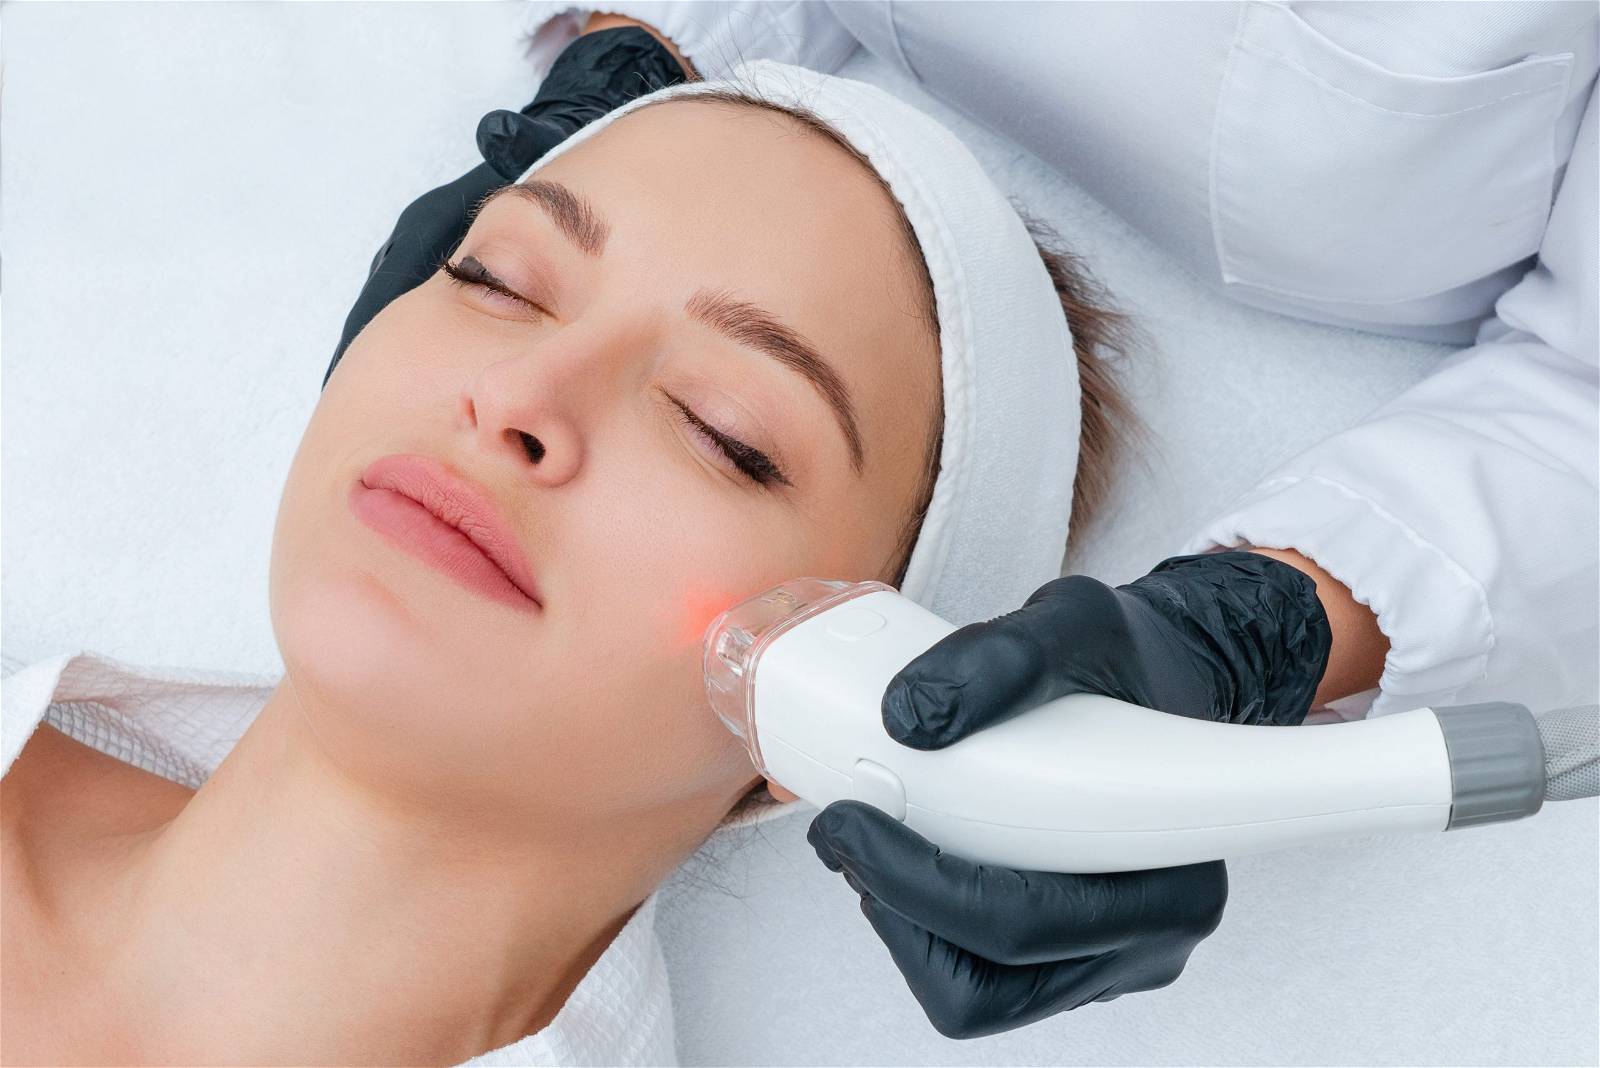 it call flawless laser hair removal from women faces